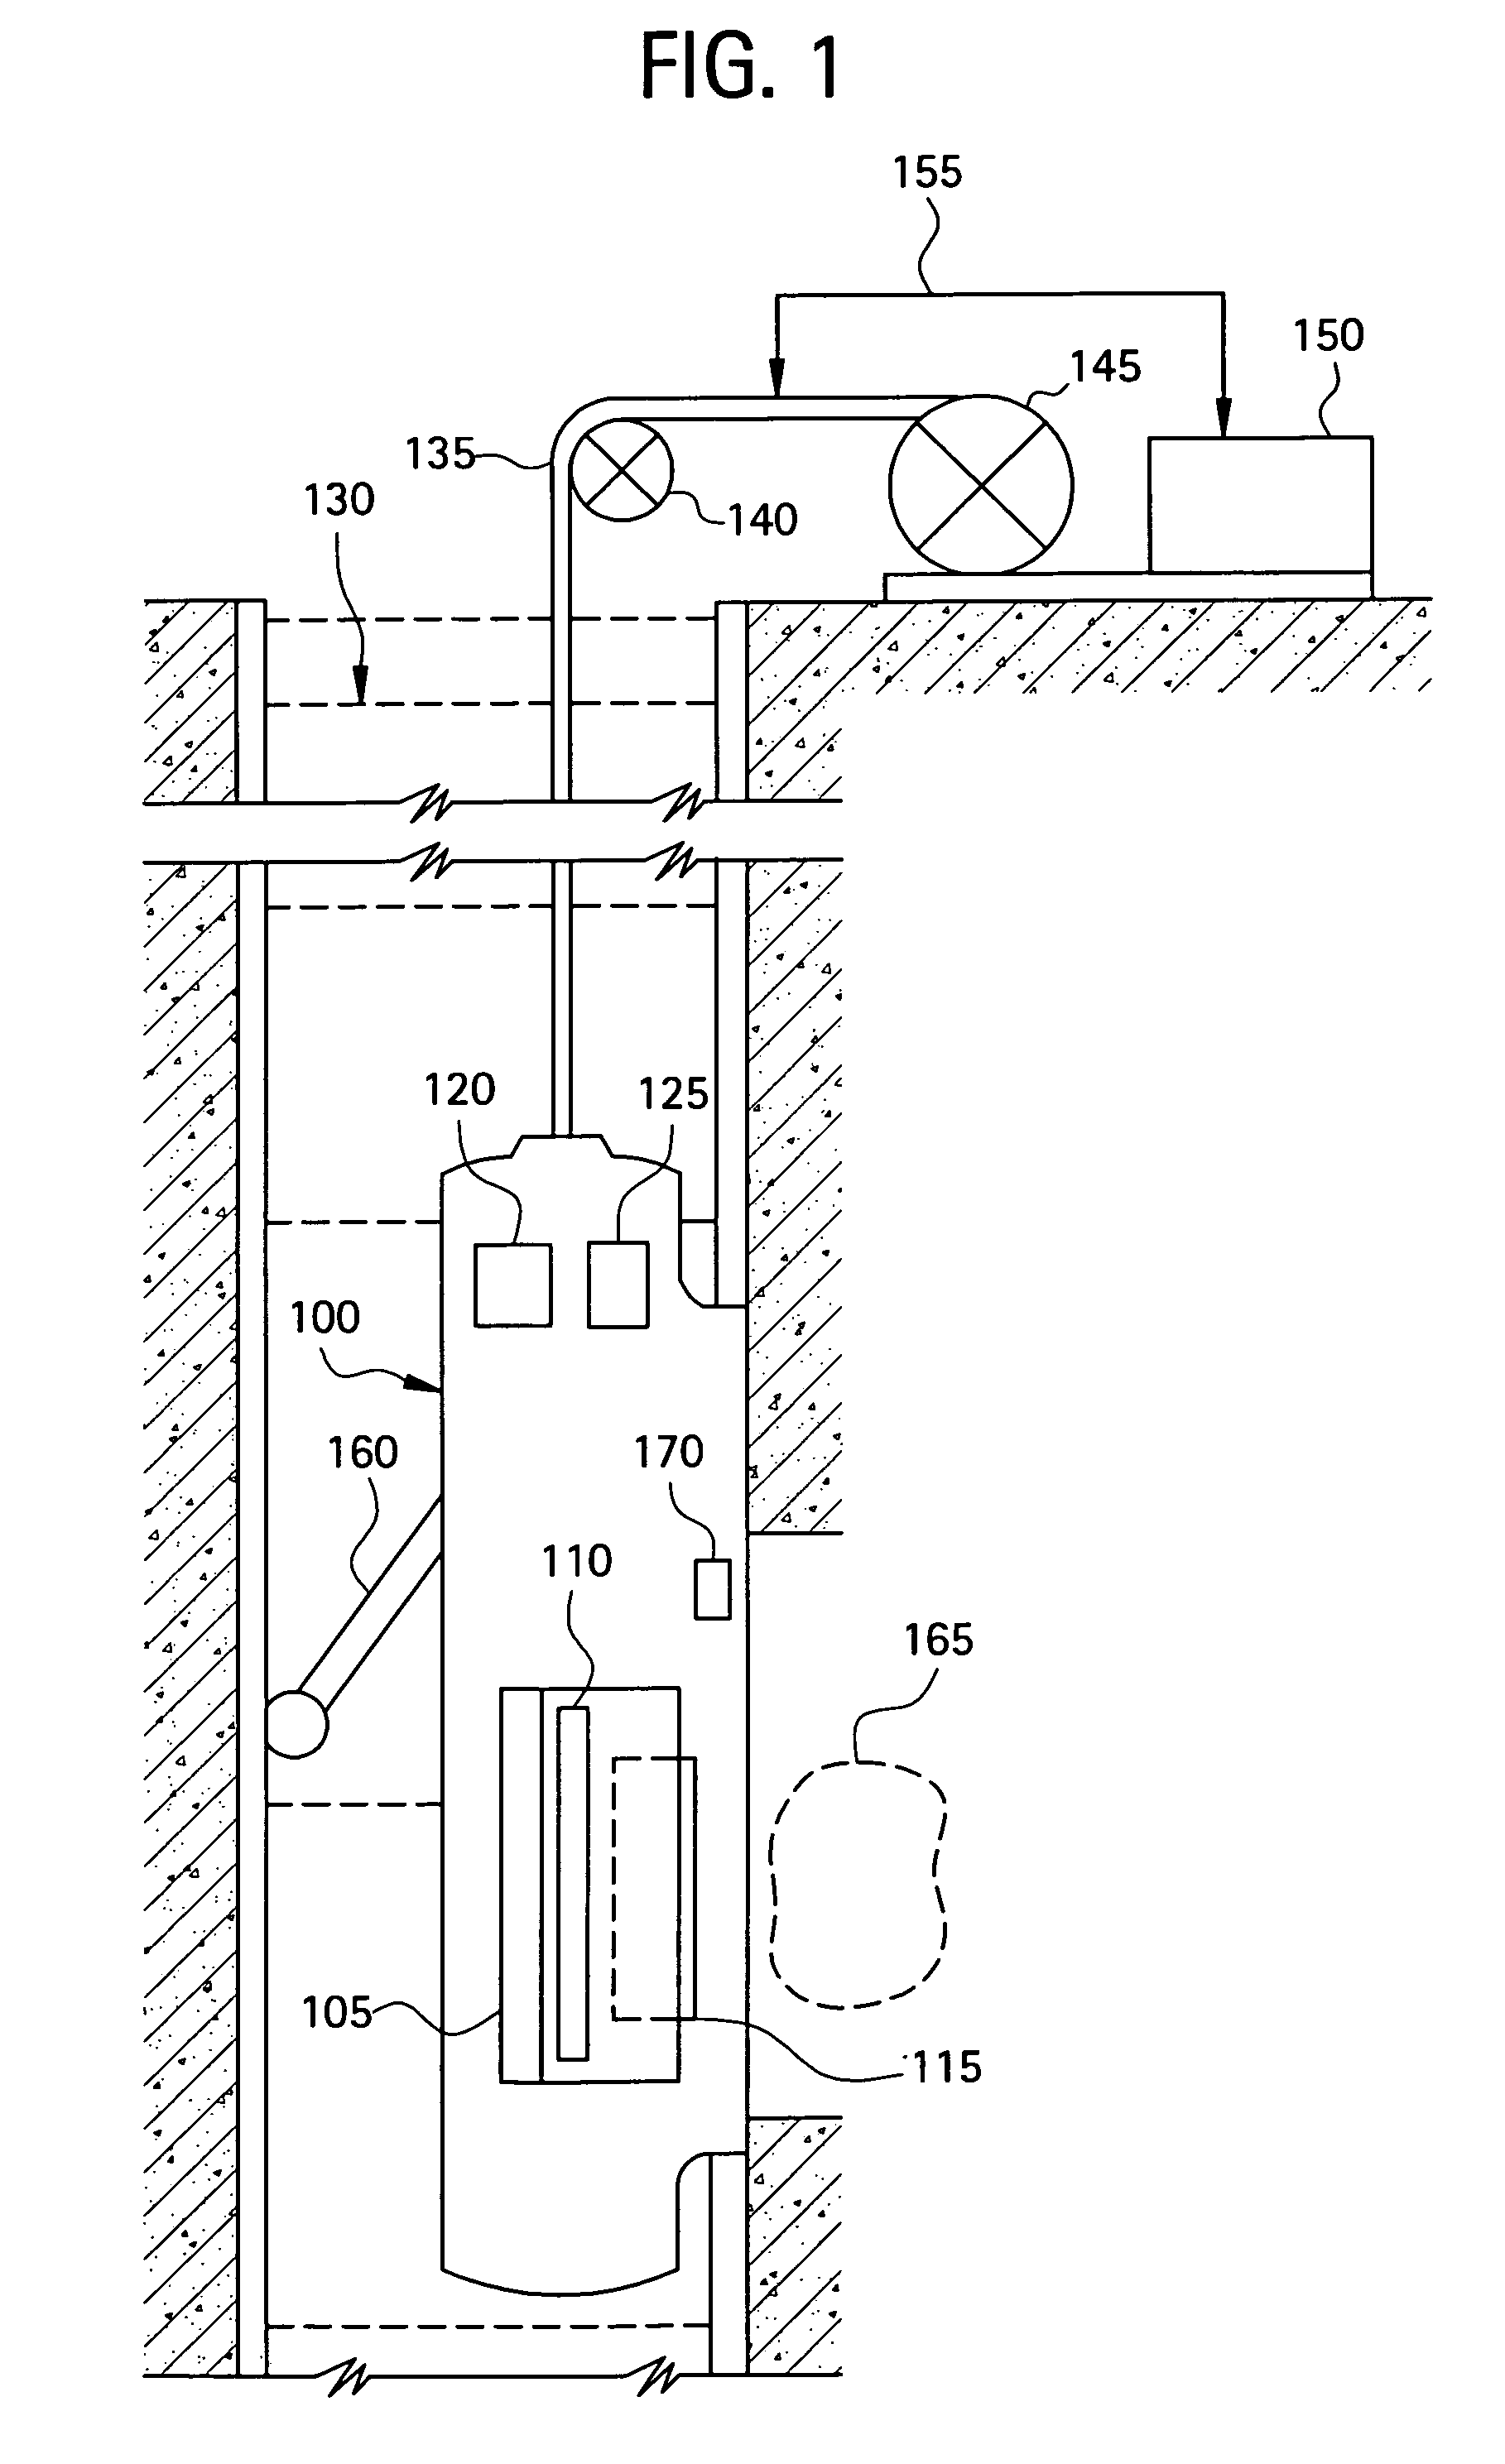 Method and apparatus for characterizing heavy oil components in petroleum reservoirs